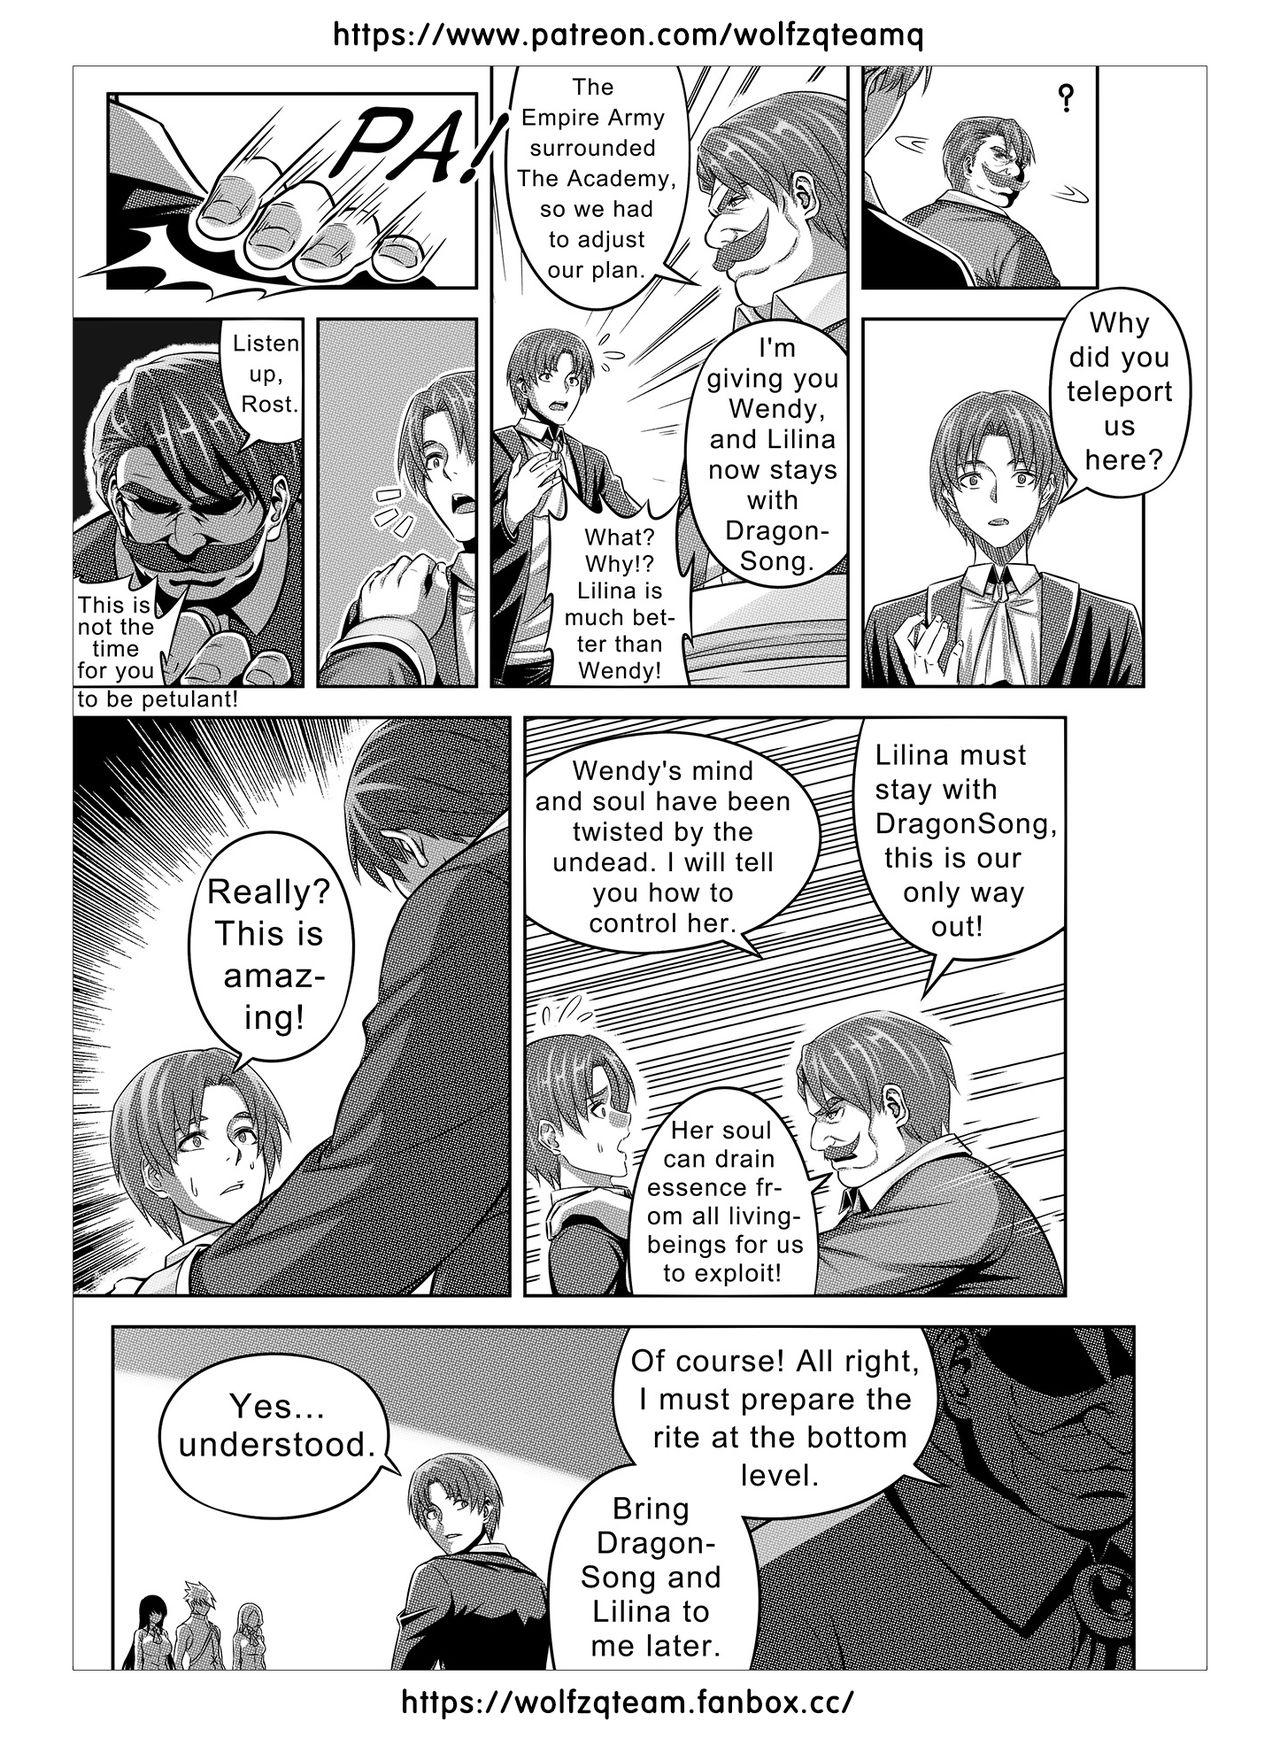 Man Bad End Of Cursed Armor College Line Gay College - Page 7